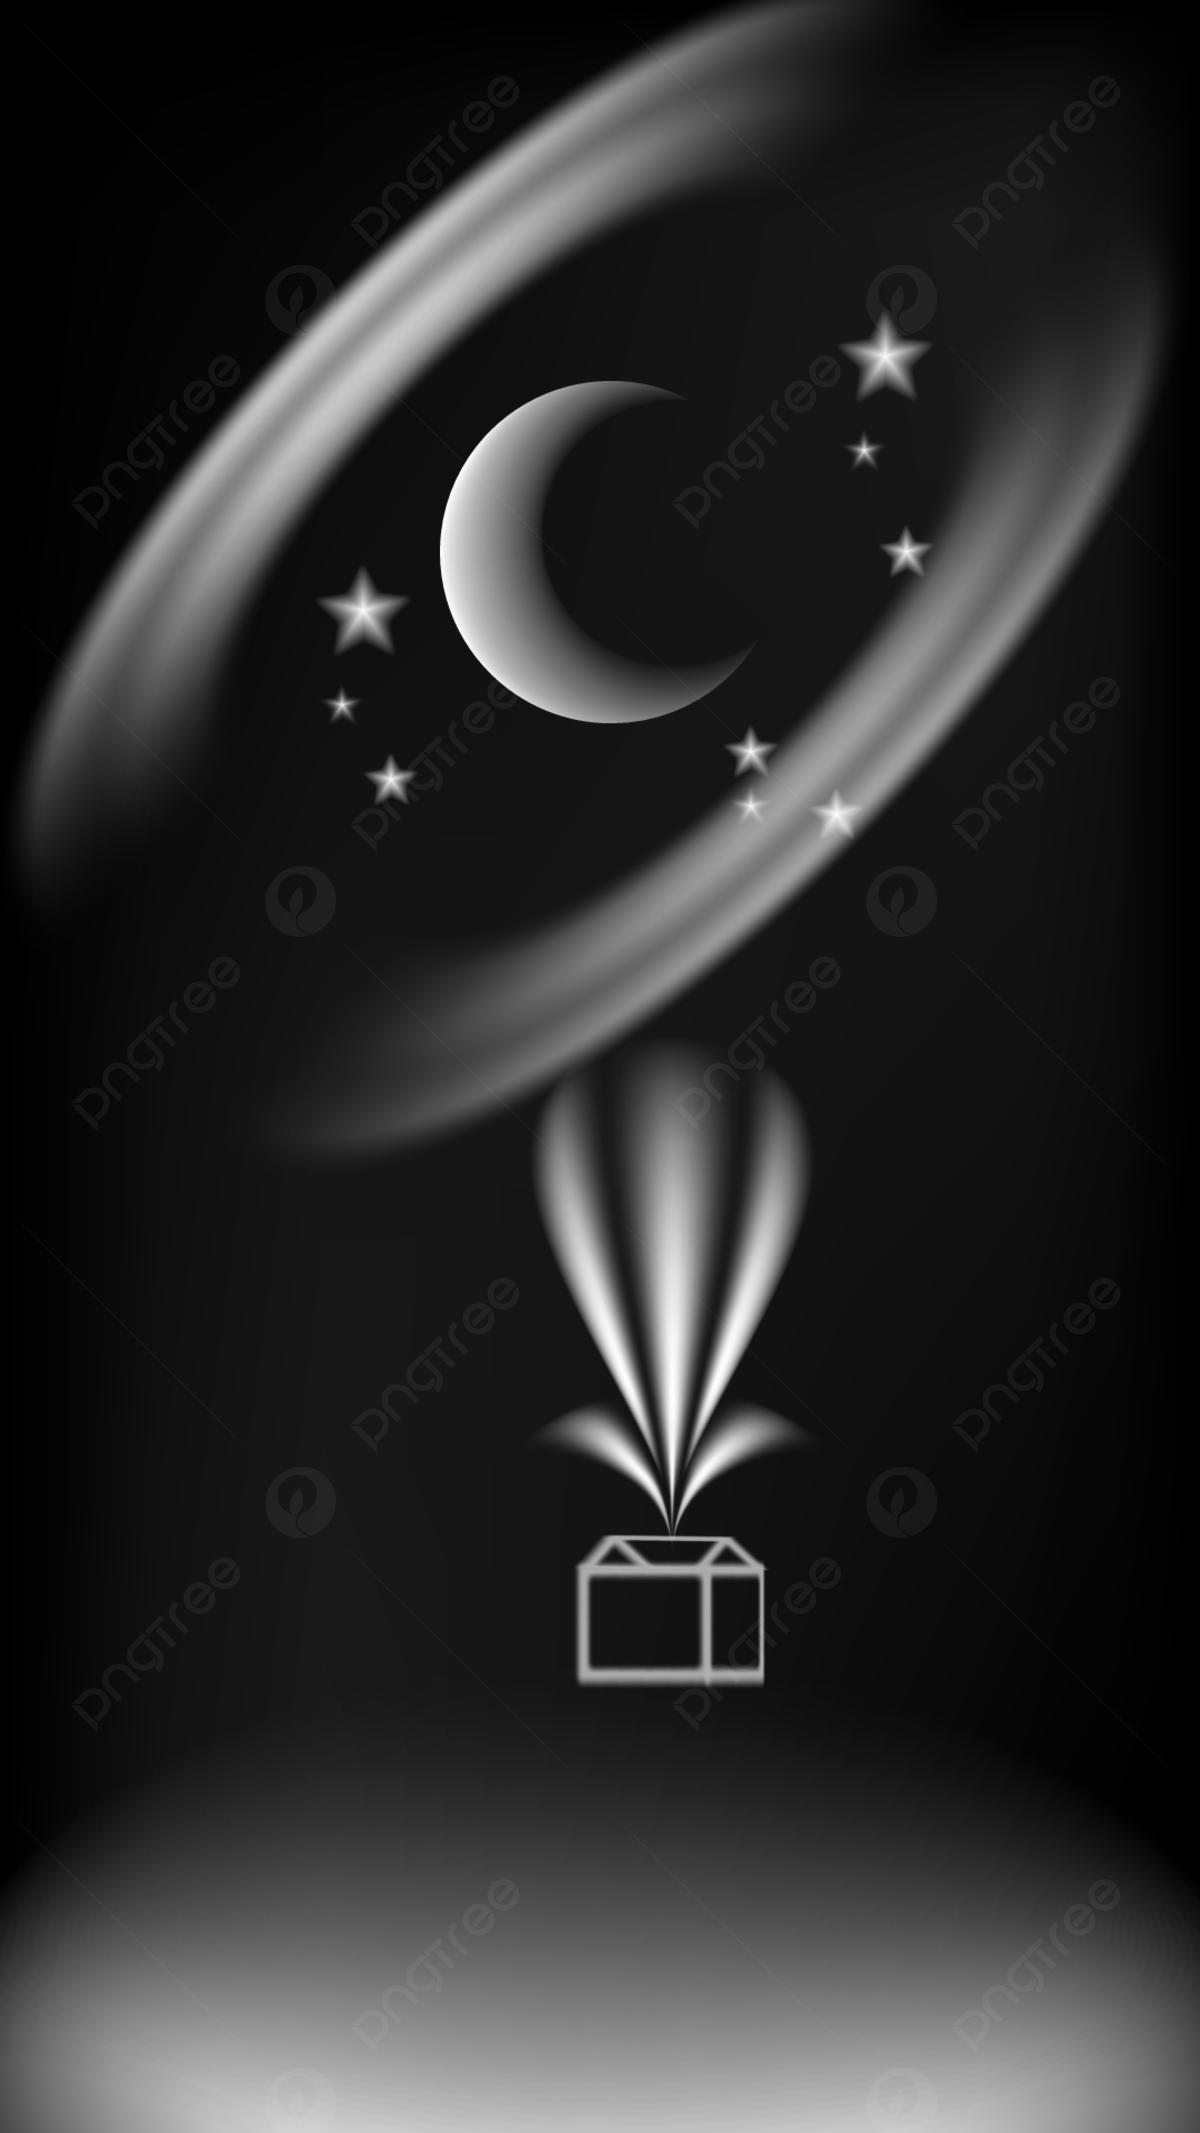 Black and white abstract illustration of a gift box - Black and white, black phone, moon phases